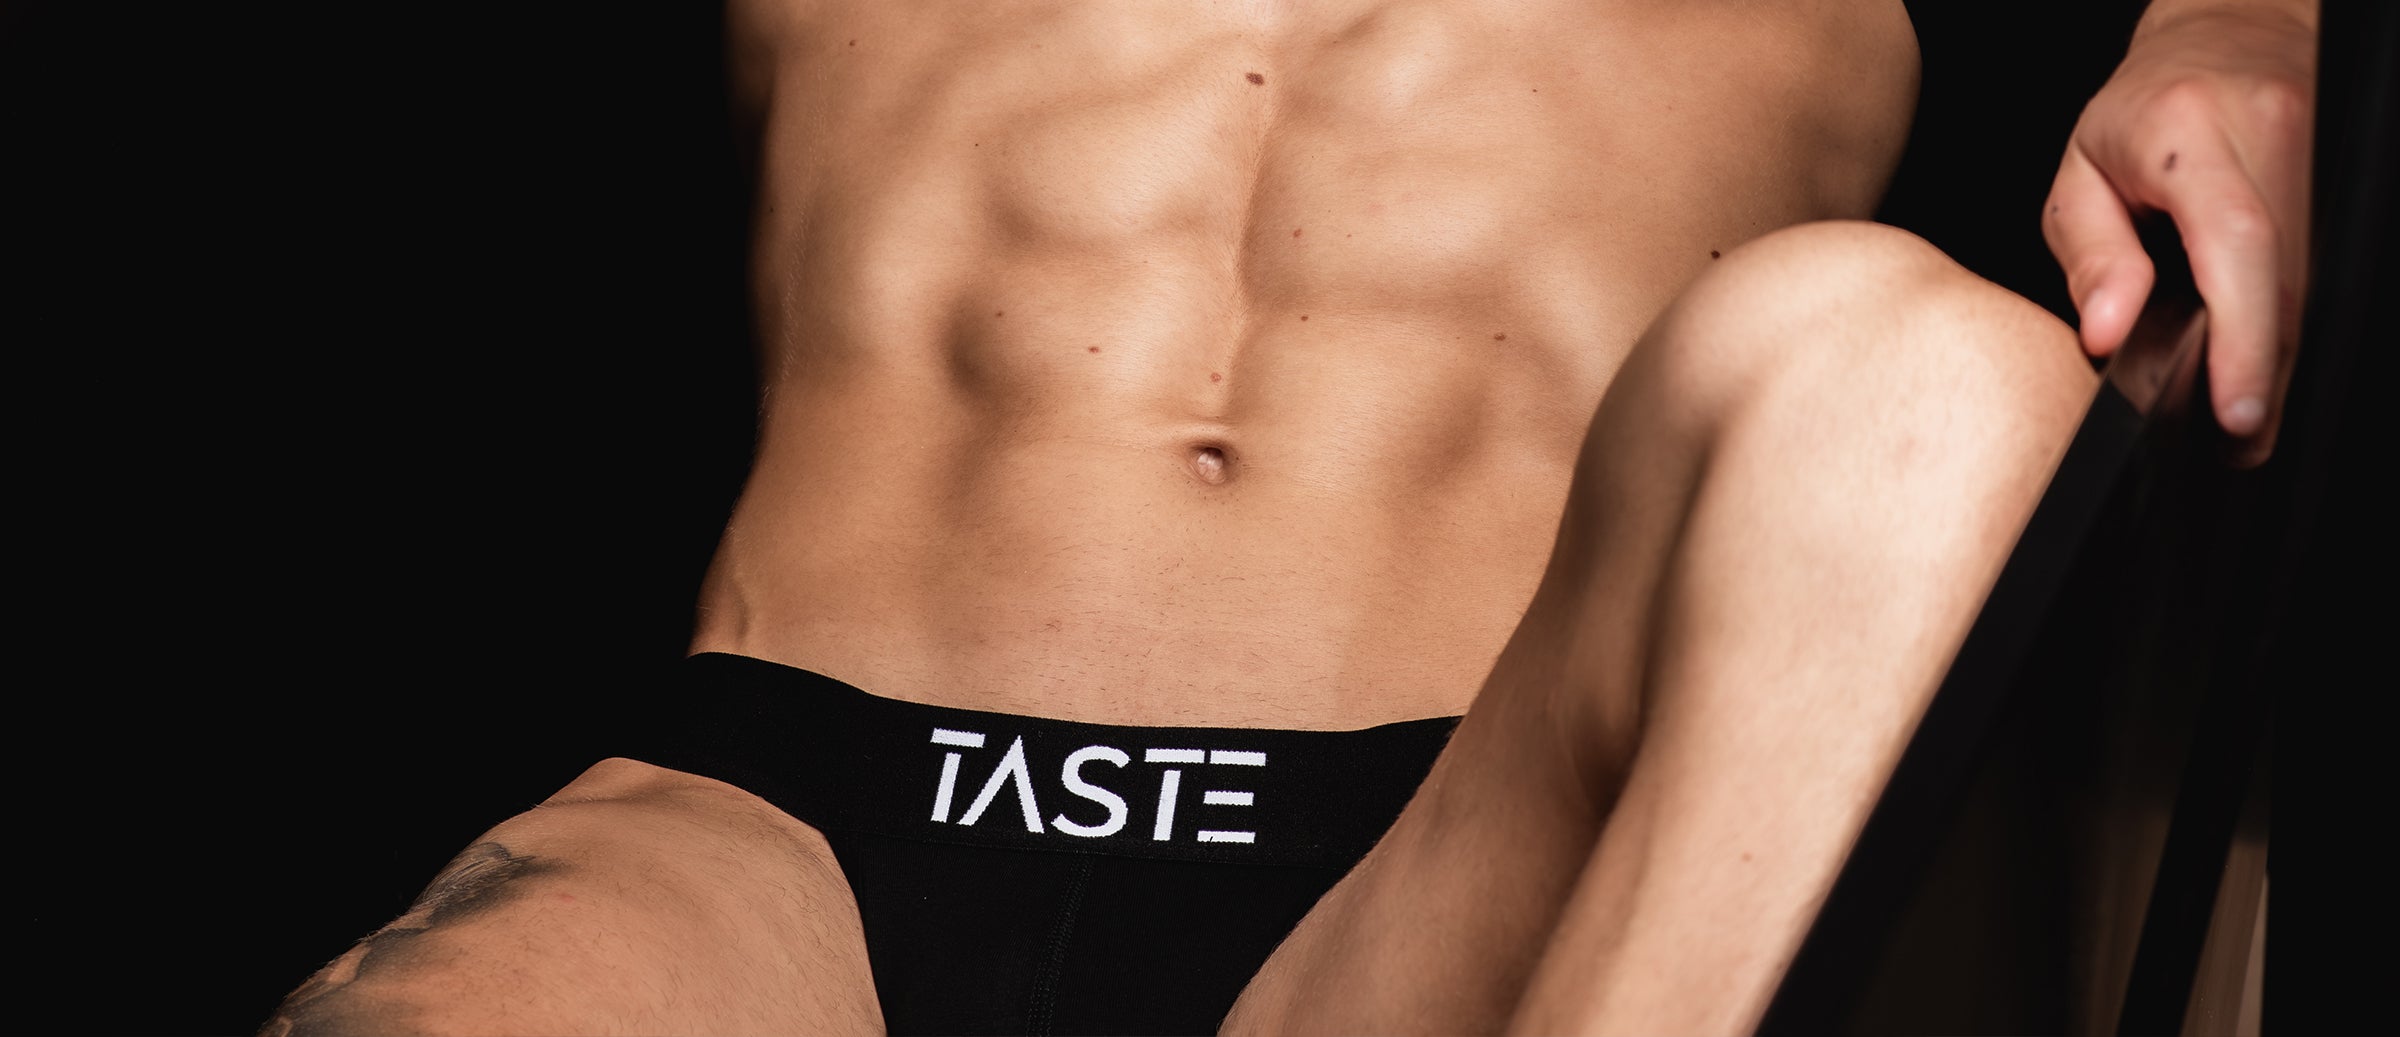 A Gay Men's Guide To Buying Your First Jockstrap